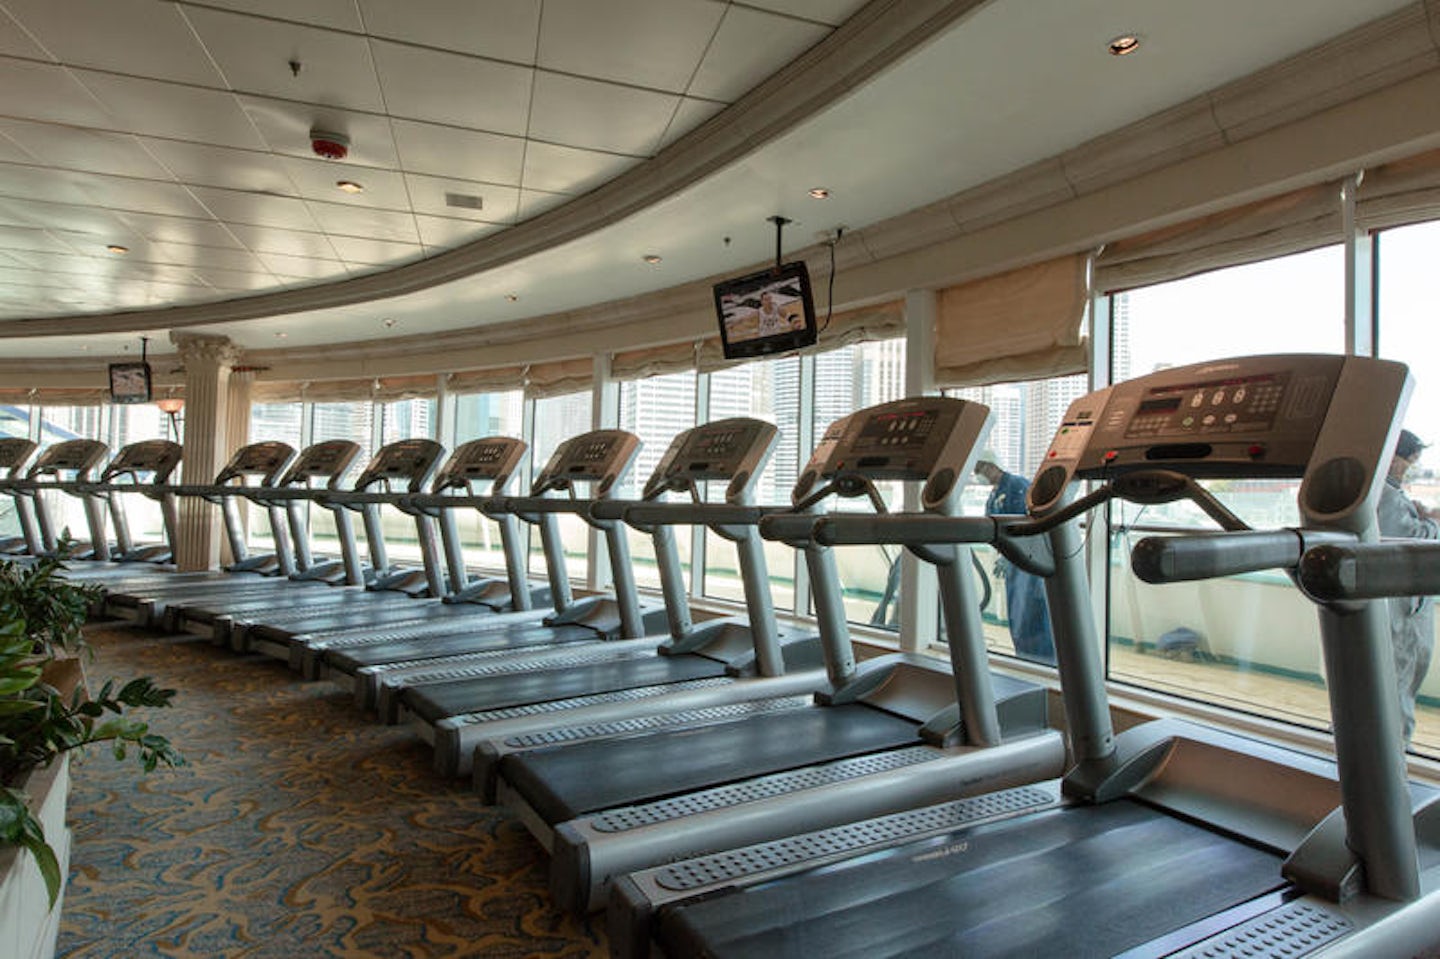 Vitality at Sea Fitness Center on Voyager of the Seas